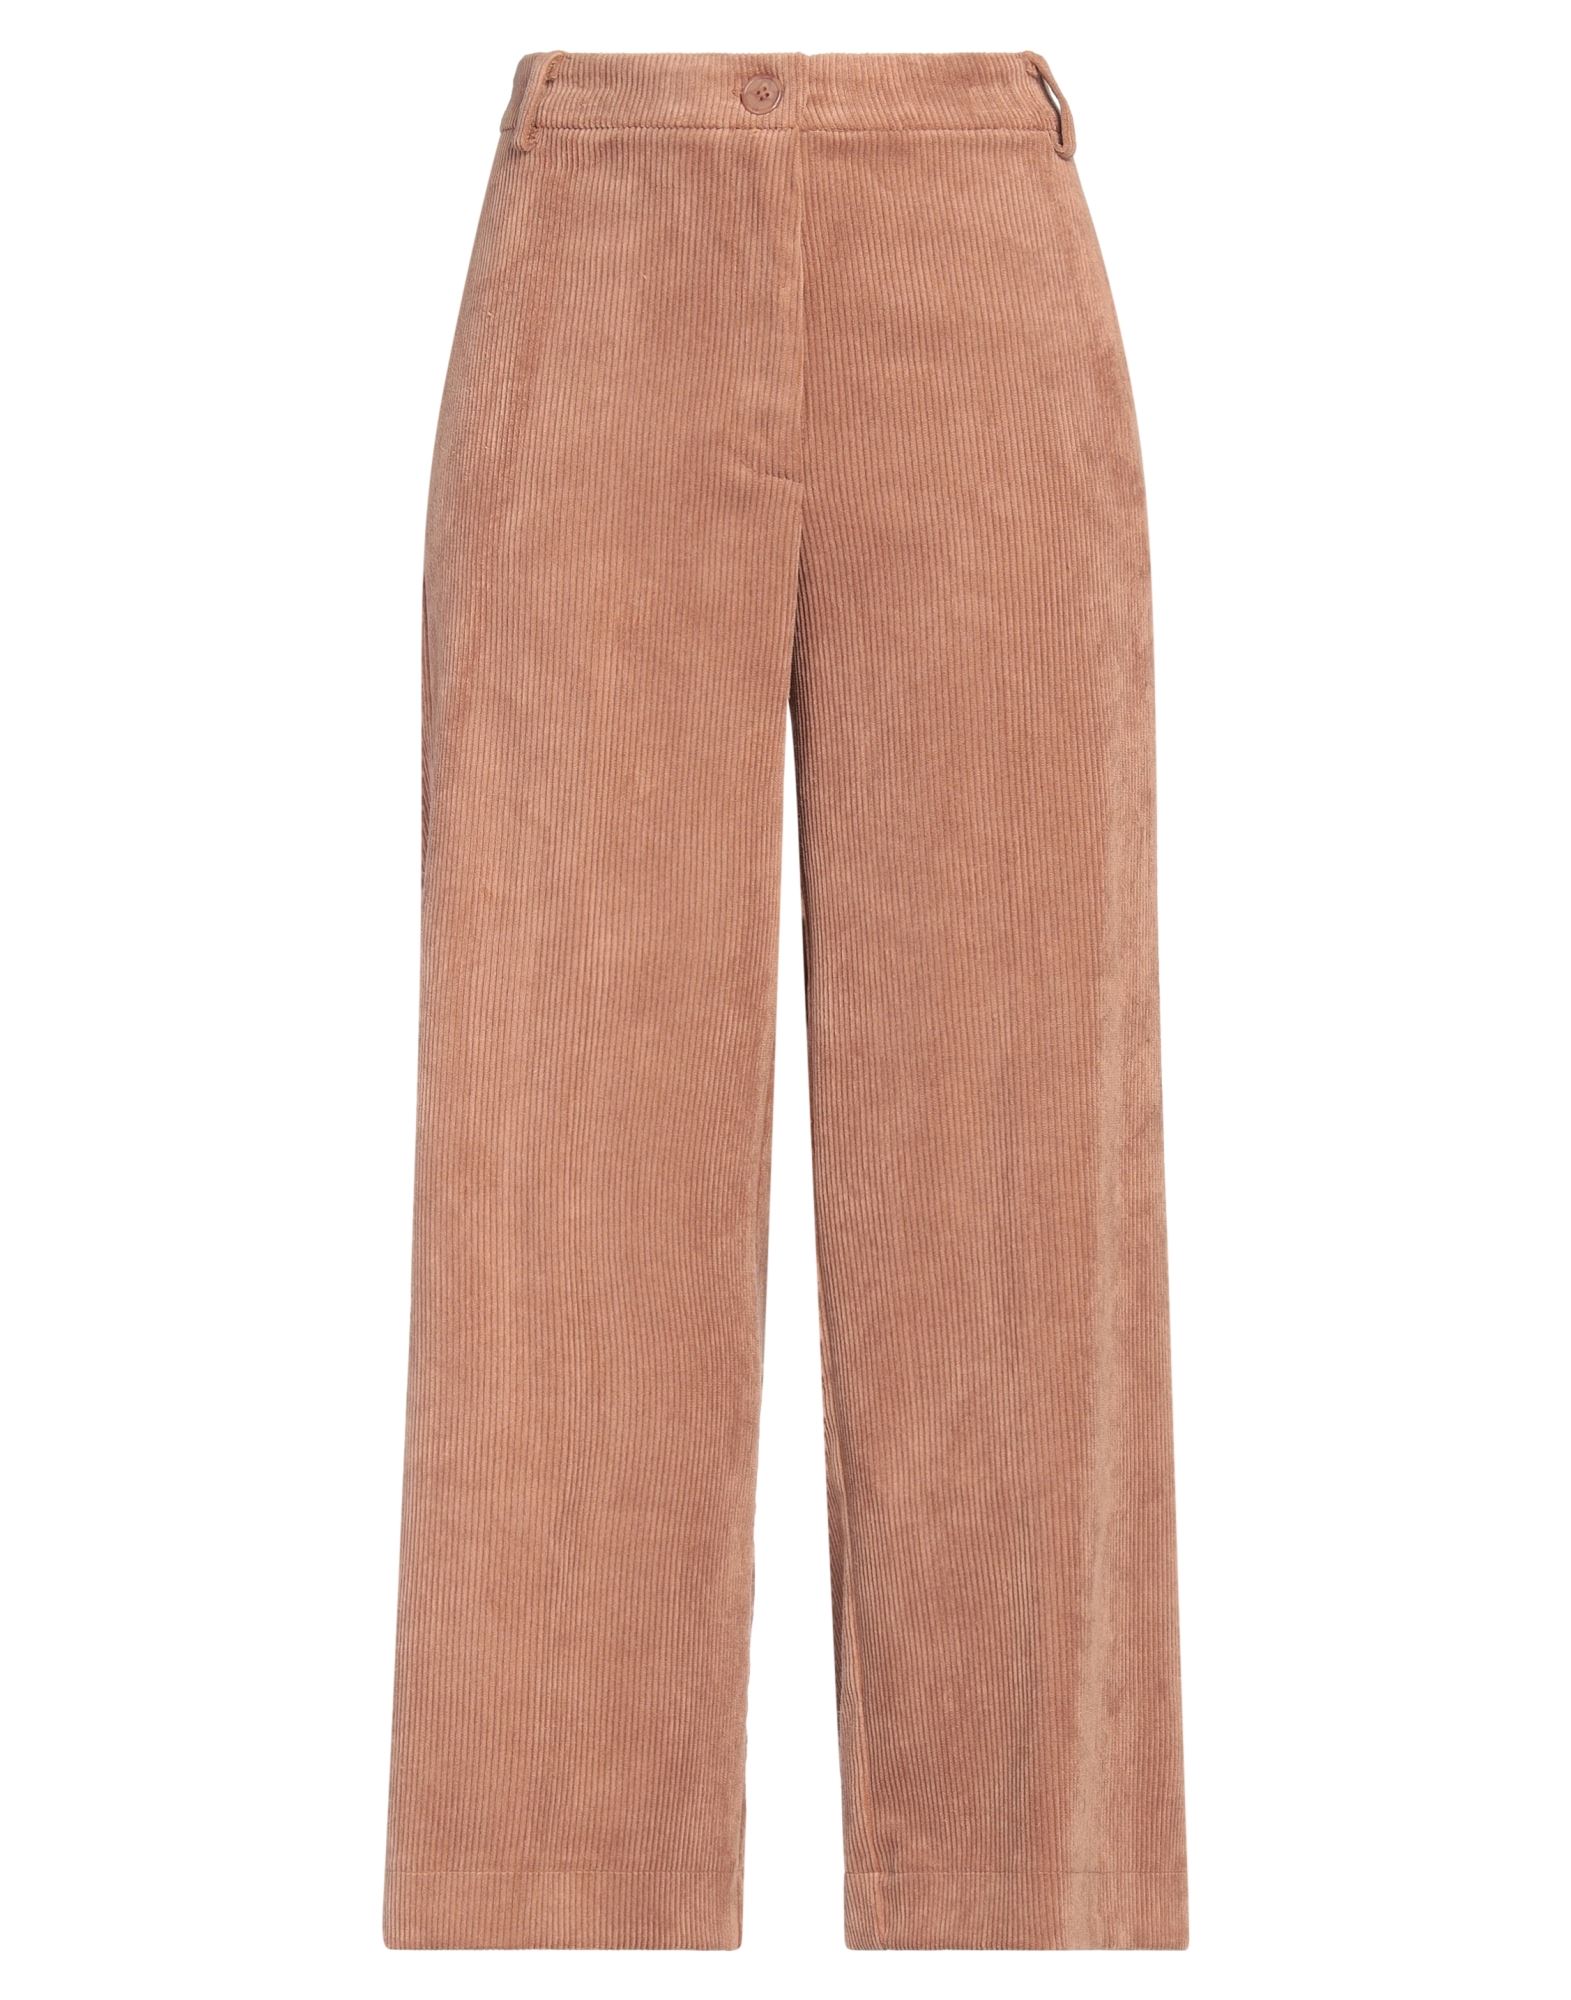 Spago Donna Pants In Camel